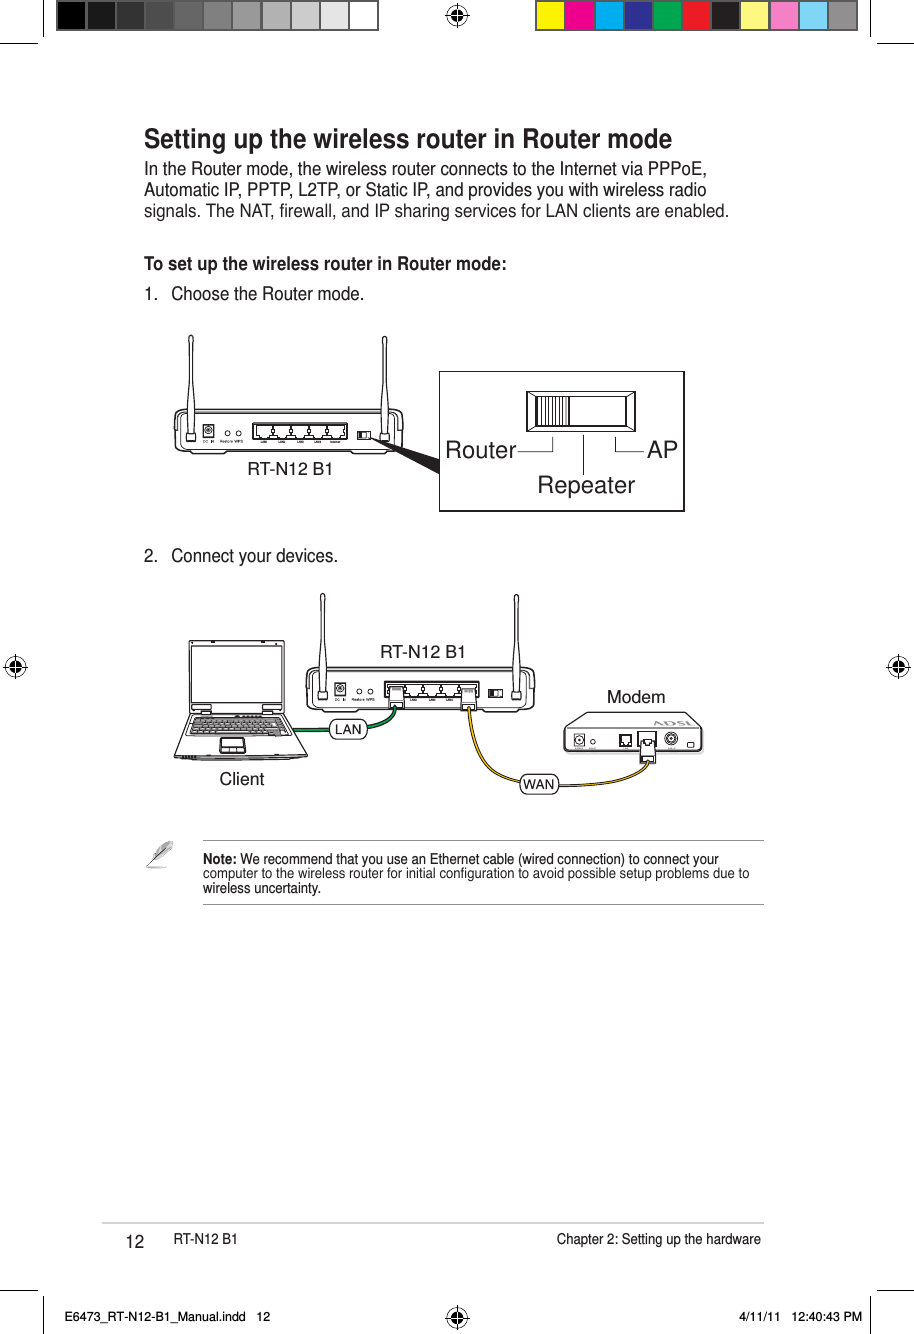 12 RT-N12 B1                      Chapter 2: Setting up the hardwareLAN1 LAN2 LAN3 LAN4 InternetModemRT-N12 B1Client2.  Connect your devices.Setting up the wireless router in Router modeIn the Router mode, the wireless router connects to the Internet via PPPoE, Automatic IP, PPTP, L2TP, or Static IP, and provides you with wireless radio signals. The NAT, rewall, and IP sharing services for LAN clients are enabled.To set up the wireless router in Router mode:1.  Choose the Router mode.Router APRepeaterRT-N12 B1LAN1 LAN2 LAN3 LAN4 InternetNote: We recommend that you use an Ethernet cable (wired connection) to connect your computer to the wireless router for initial conguration to avoid possible setup problems due to wireless uncertainty. E6473_RT-N12-B1_Manual.indd   12 4/11/11   12:40:43 PM